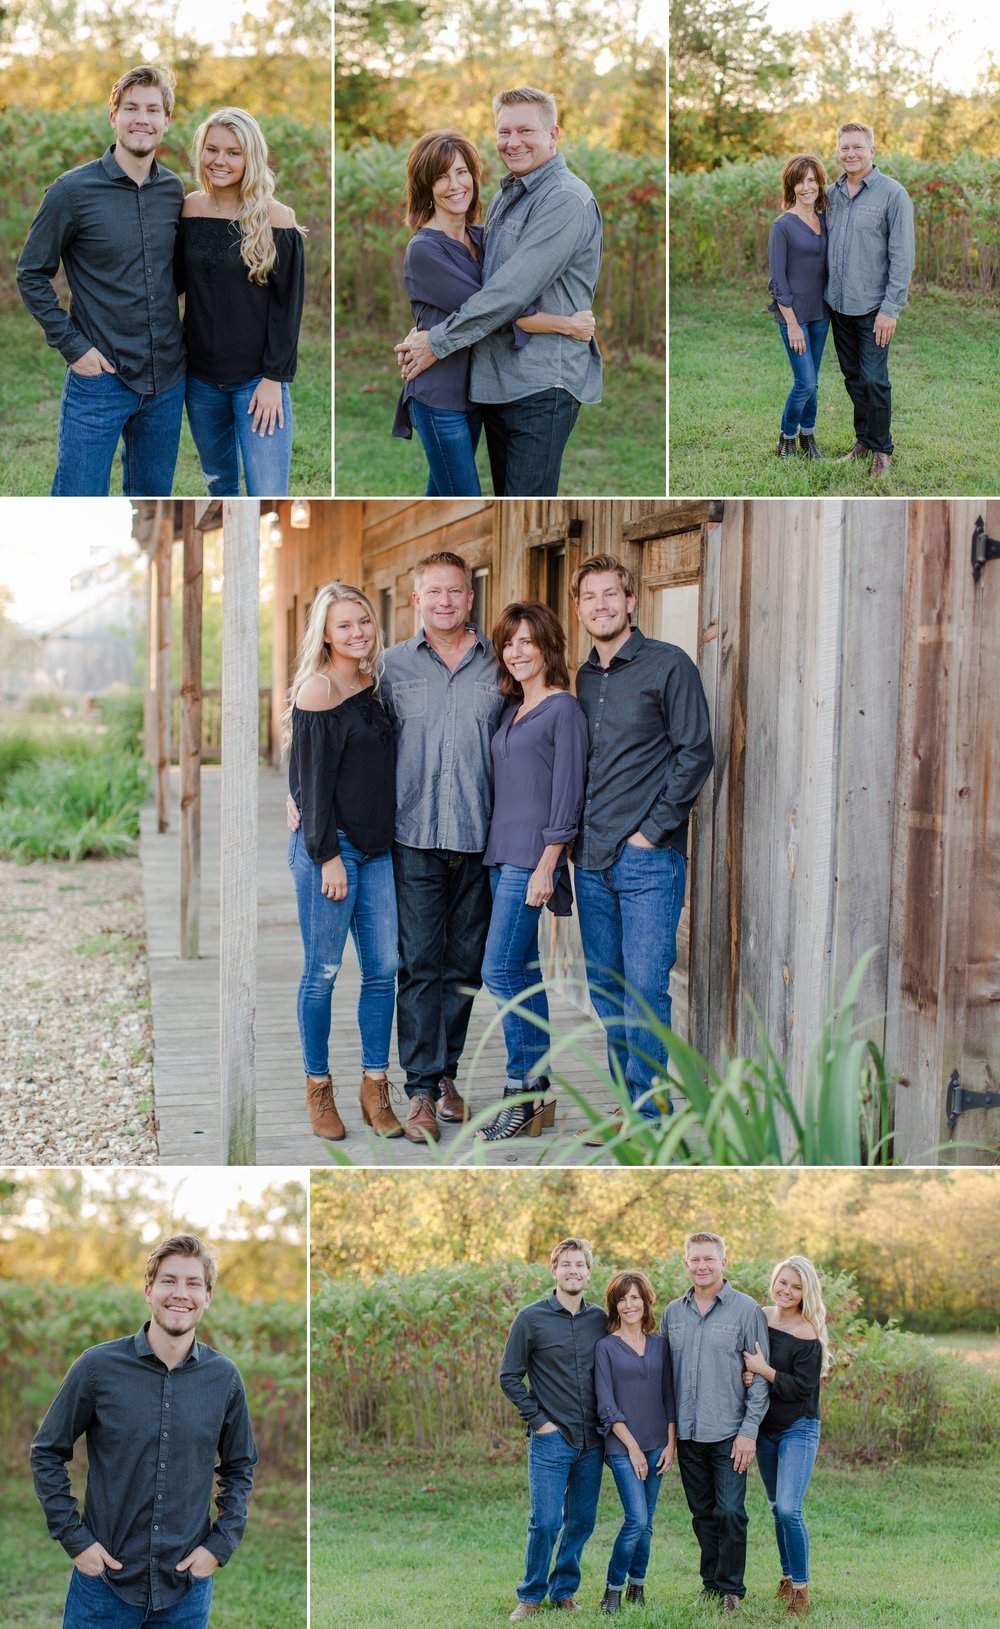  senior_girl_photography_trendy_new_haven_mo_photographer_st_louis_mo_what_to_wear_fall_photos_family_older_siblings_children 4.jpg 